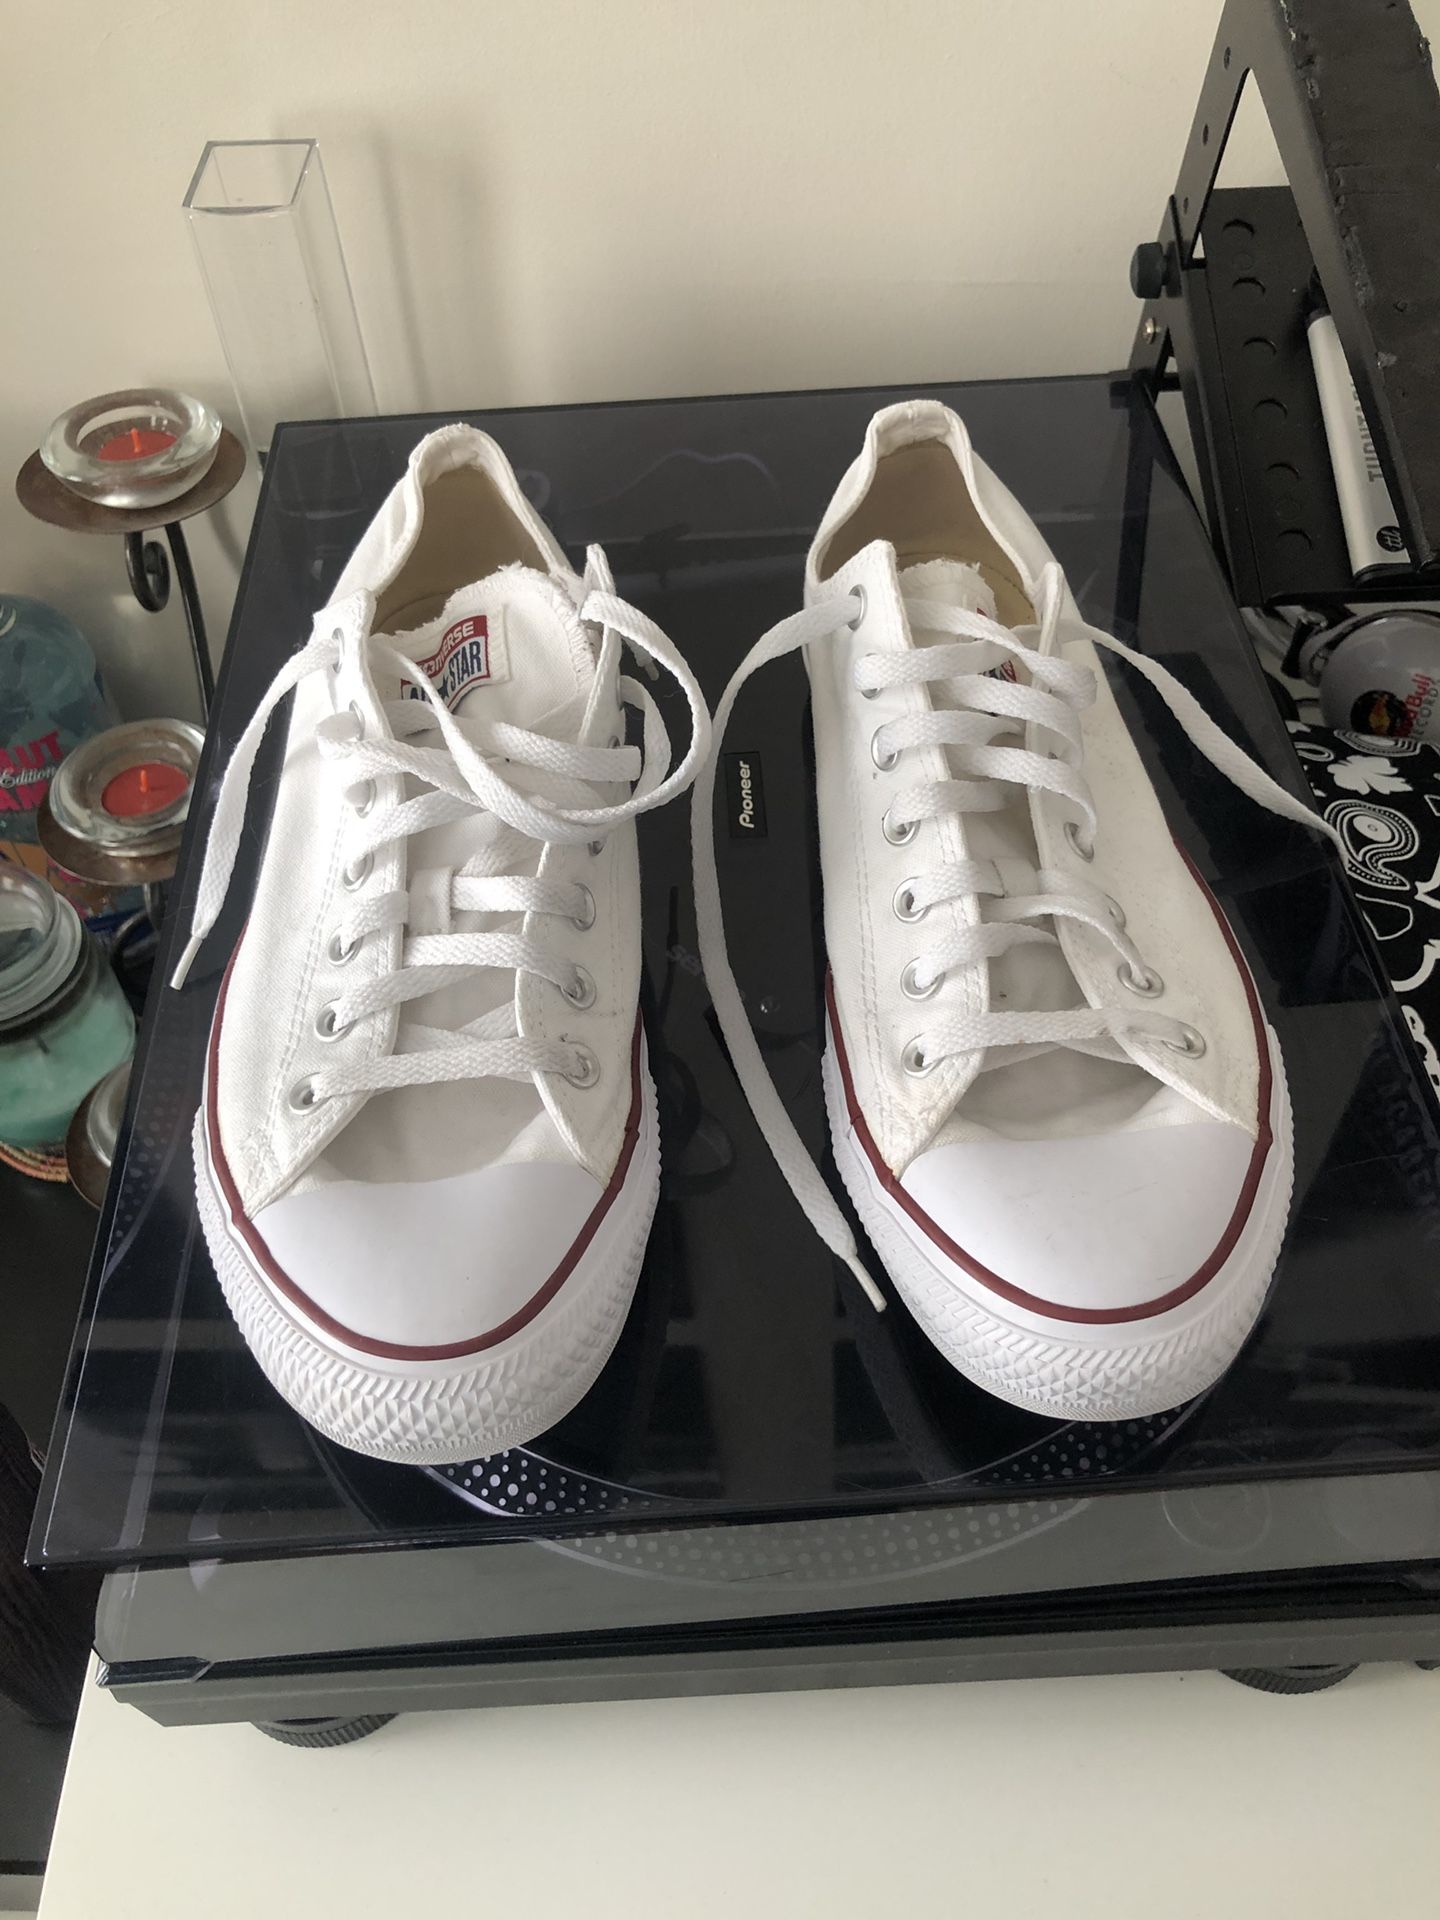 Men’s 11 White Converse Low Too All-Stars